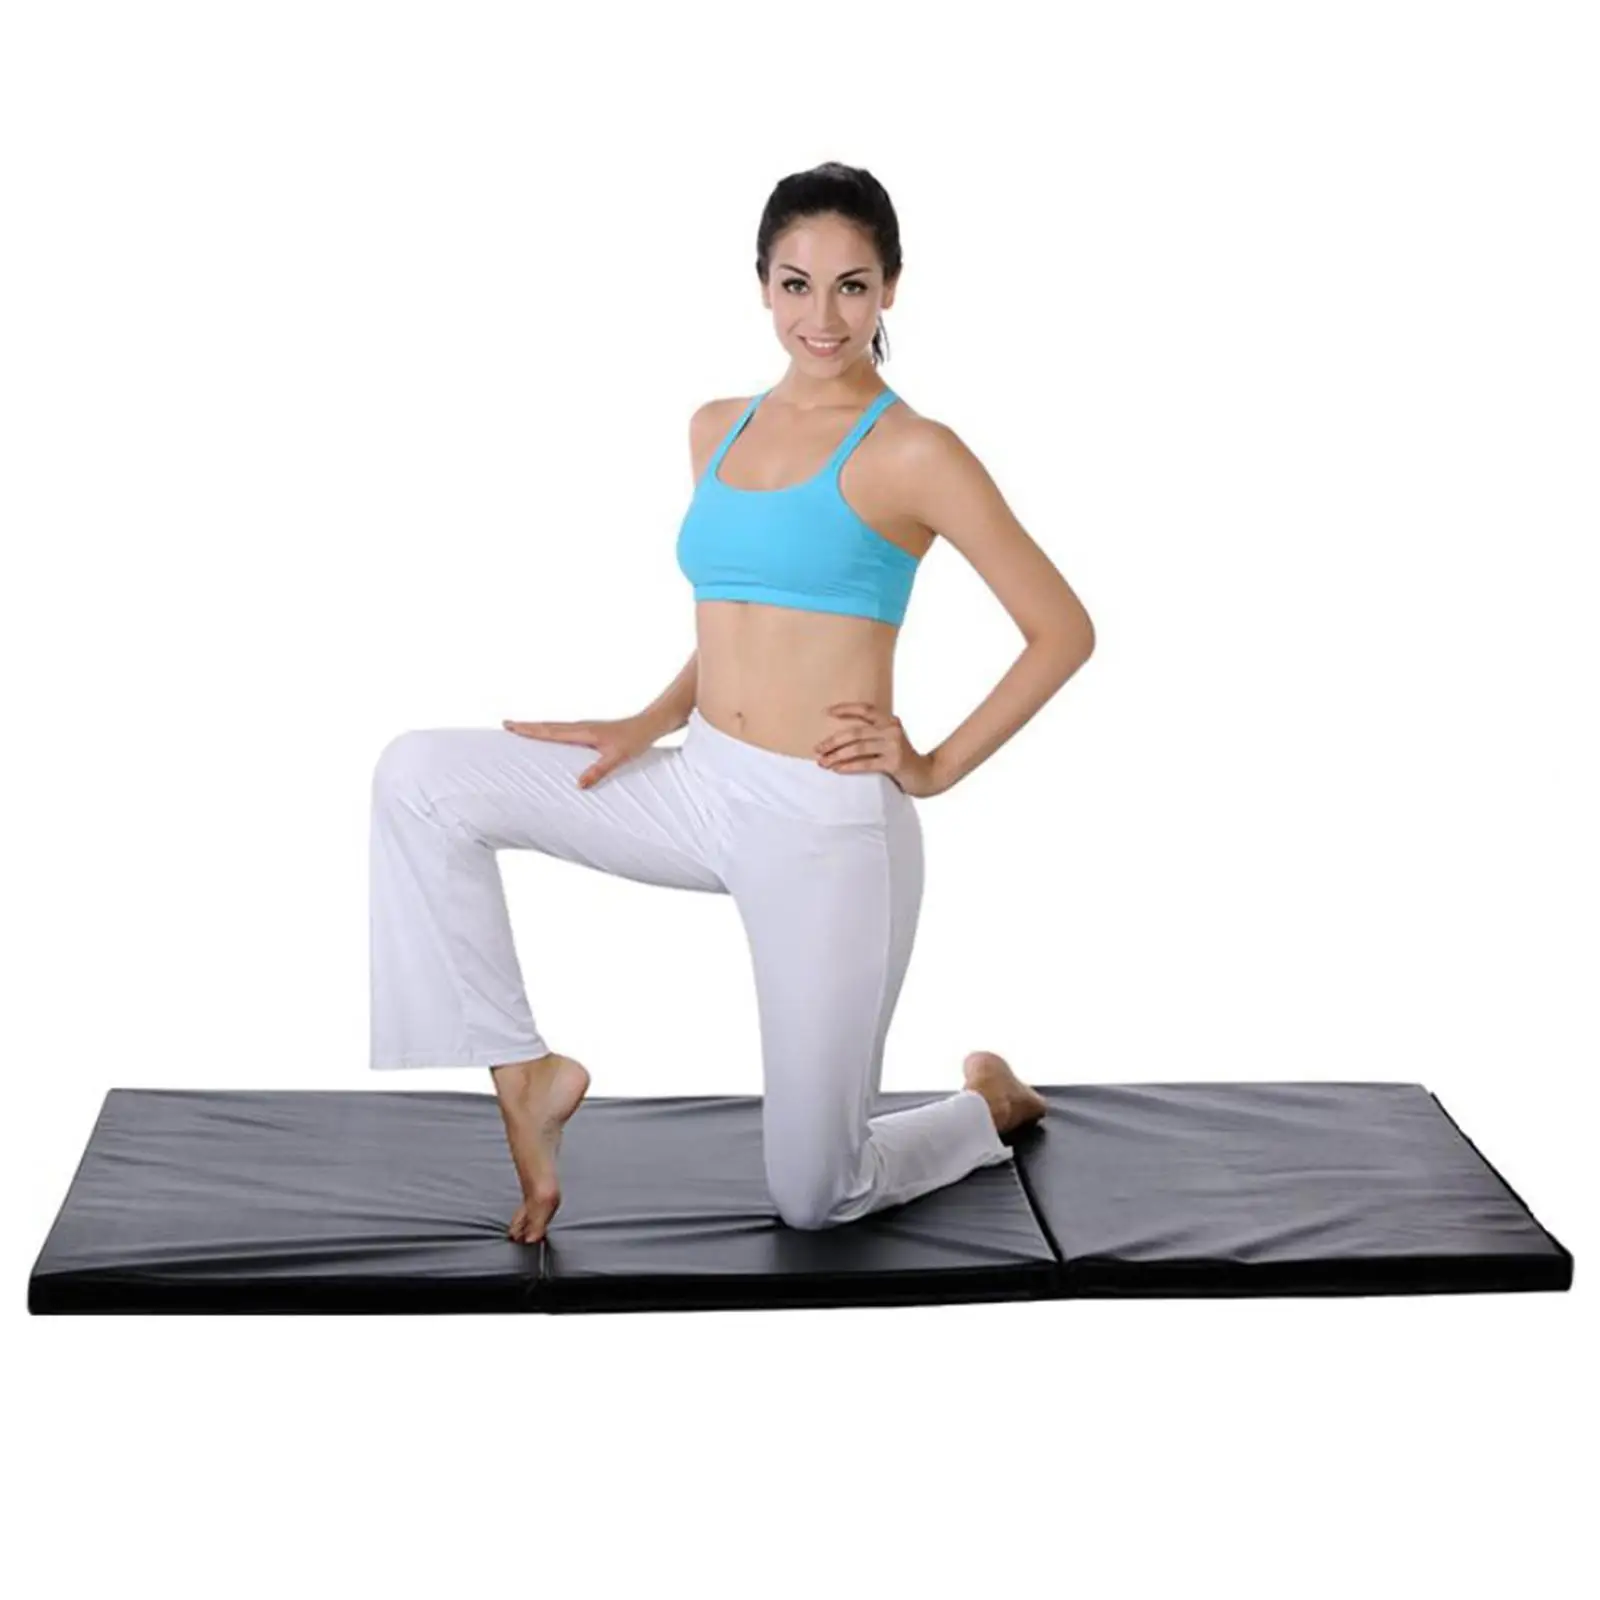 Tri Fold Folding Exercise Mat Home Gym Protective Flooring for Stretching